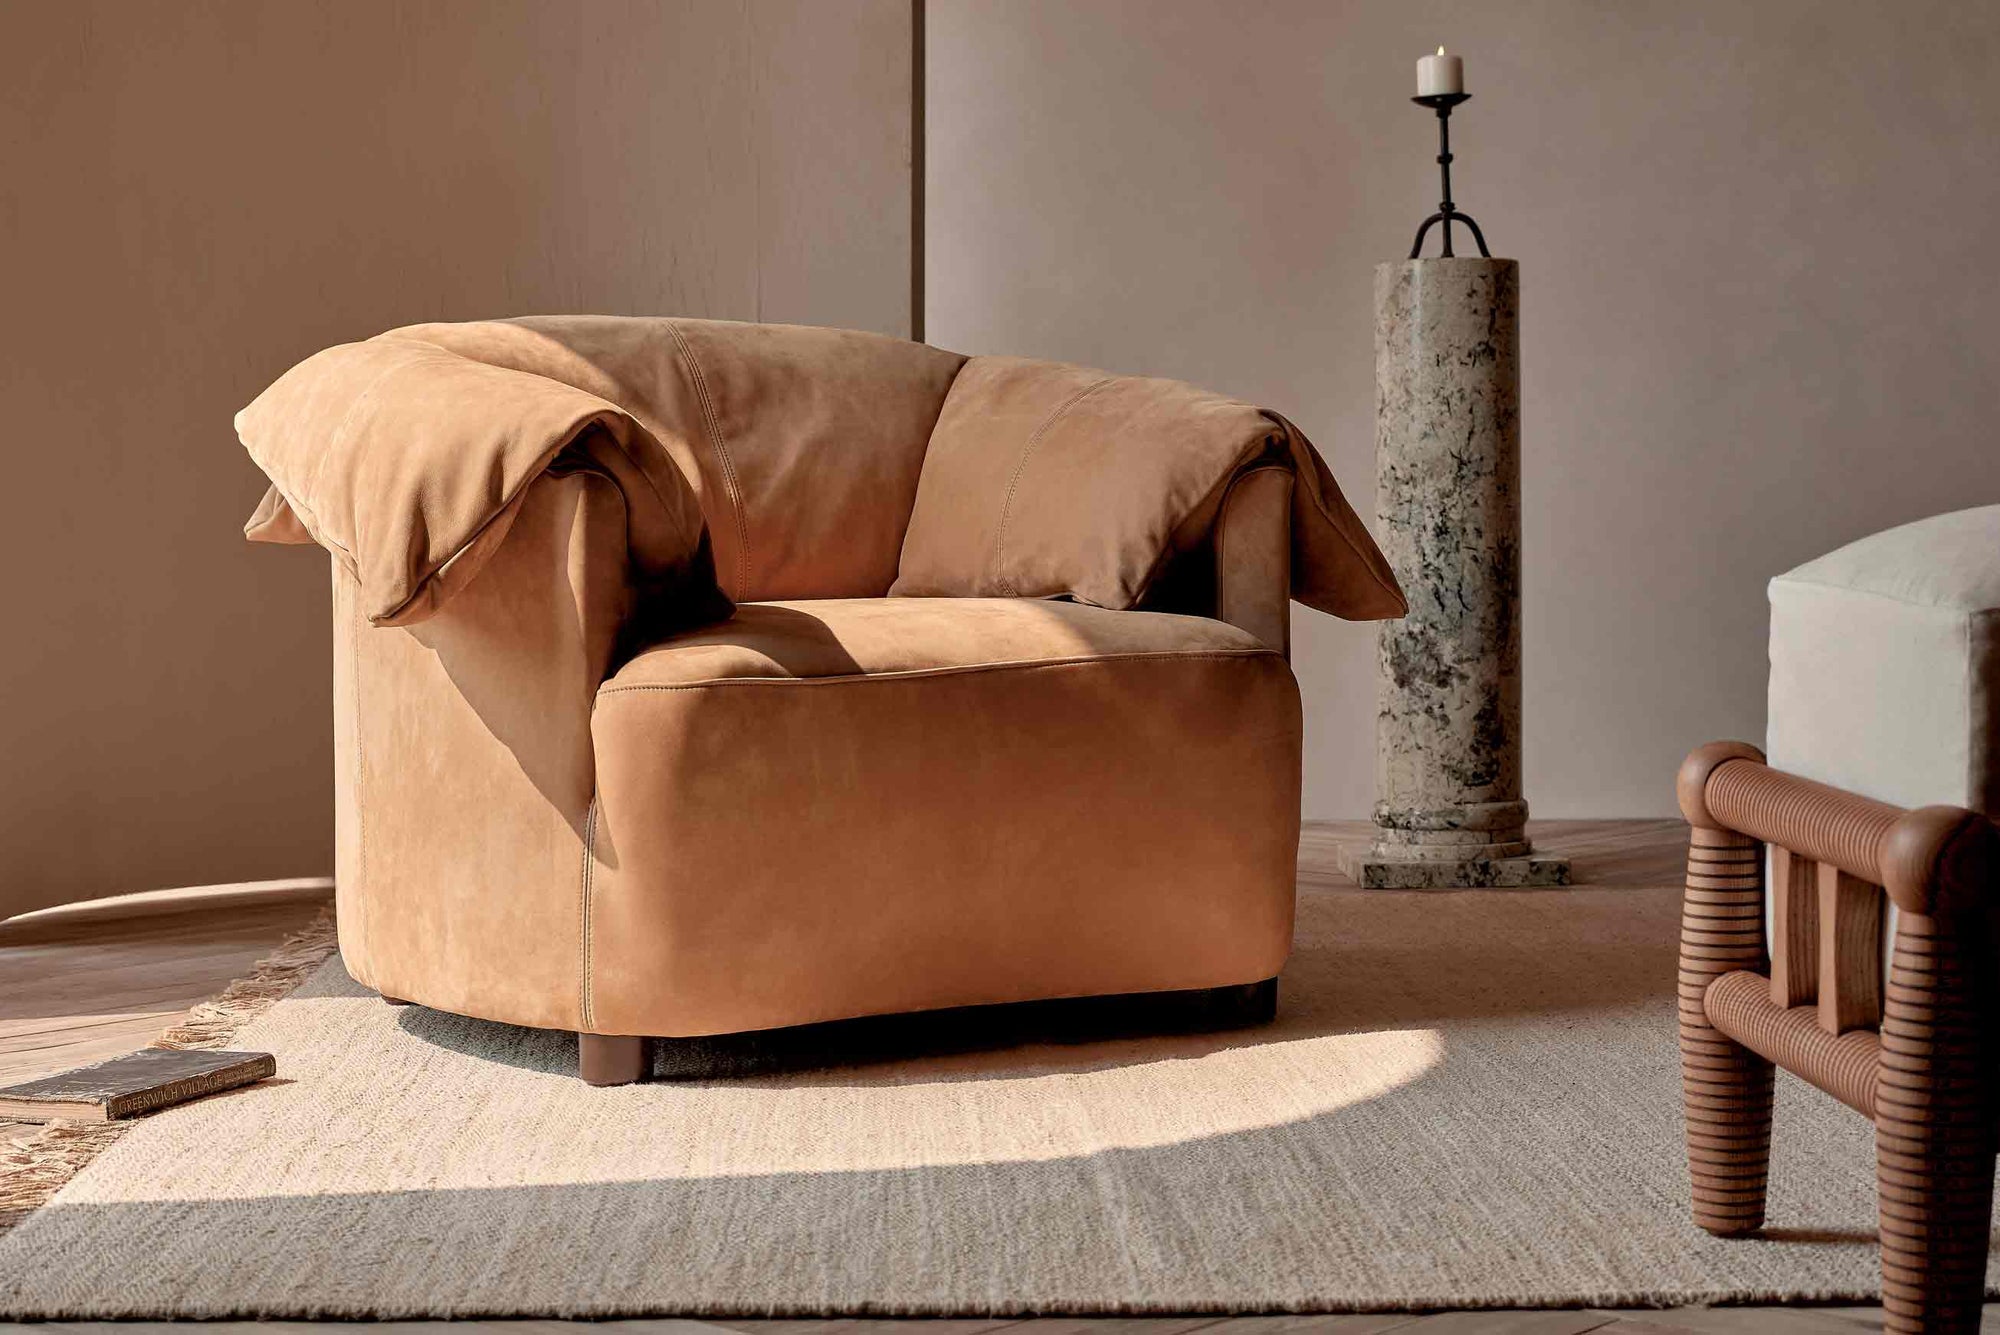 Loula Chair in Mojave Glow, a tan Meridian Leather, placed in a sunlit room